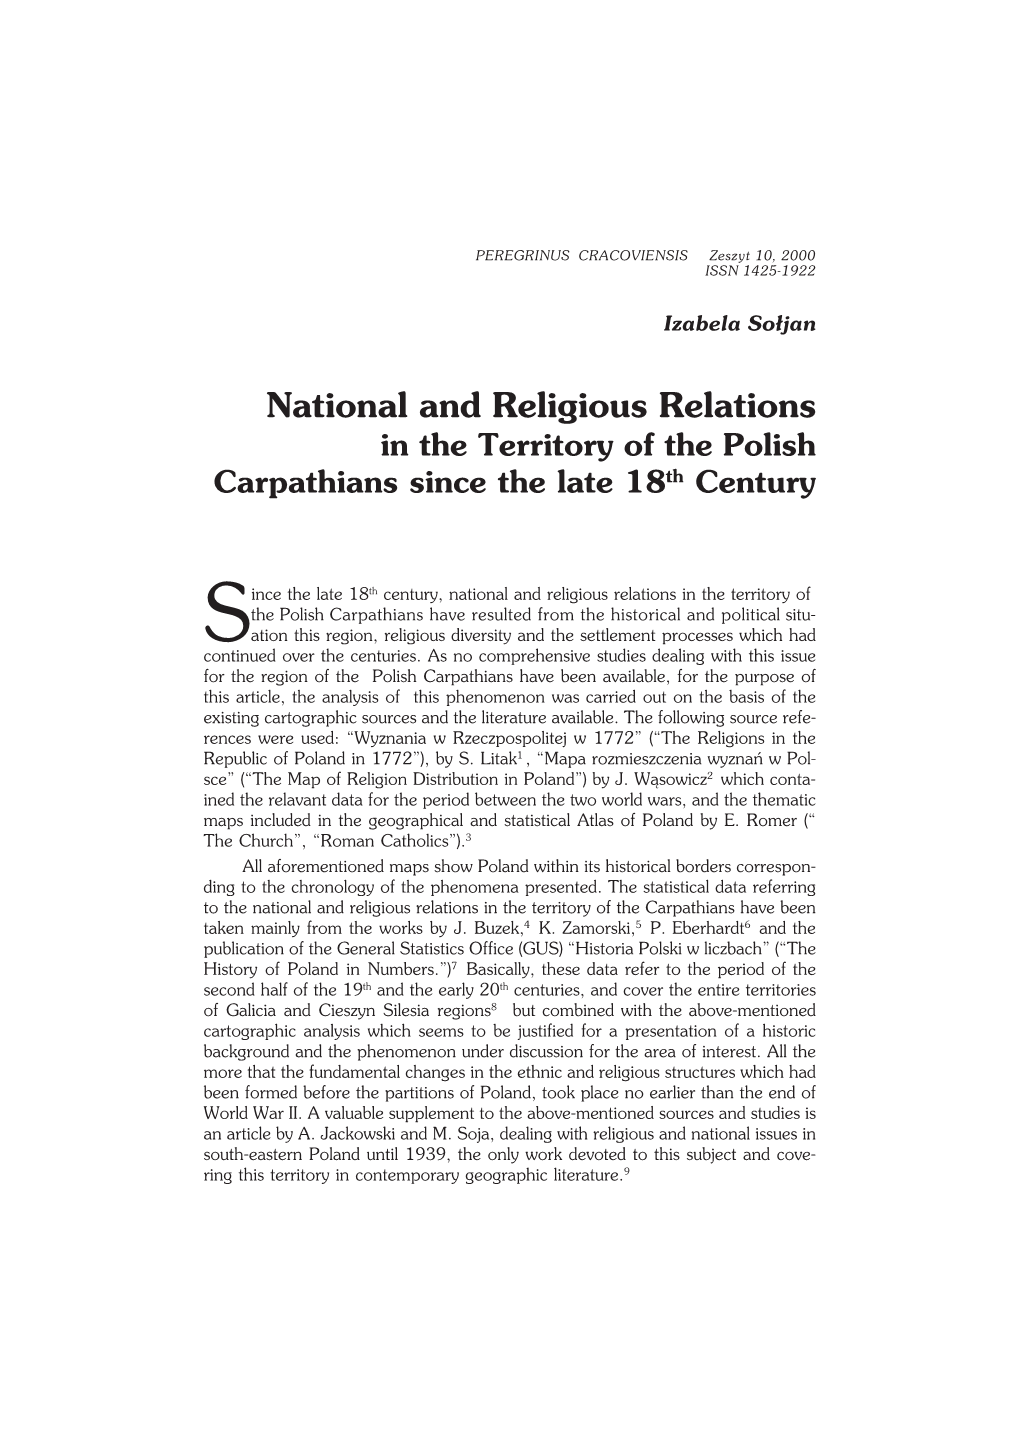 National and Religious Relations in the Territory of the Polish Carpathians Since the Late 18Th Century